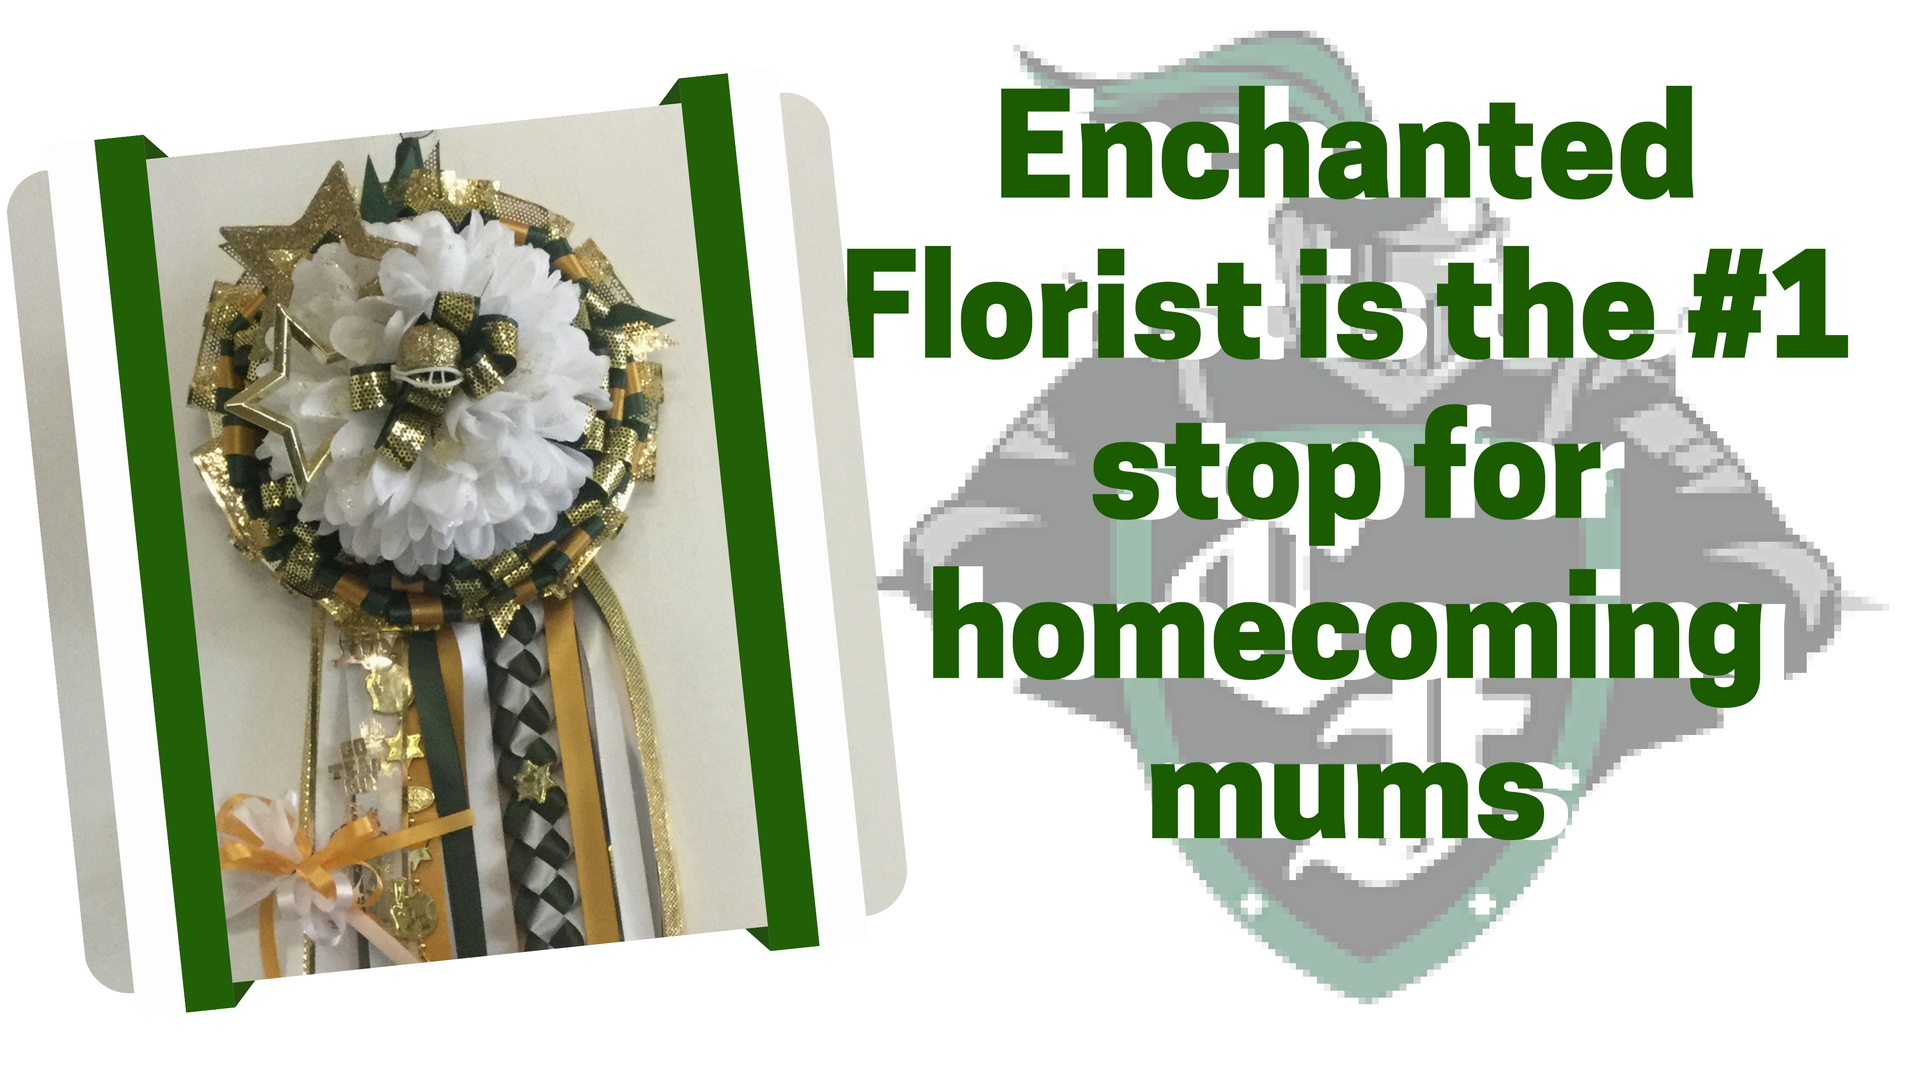 homecoming mums for clear falls high school